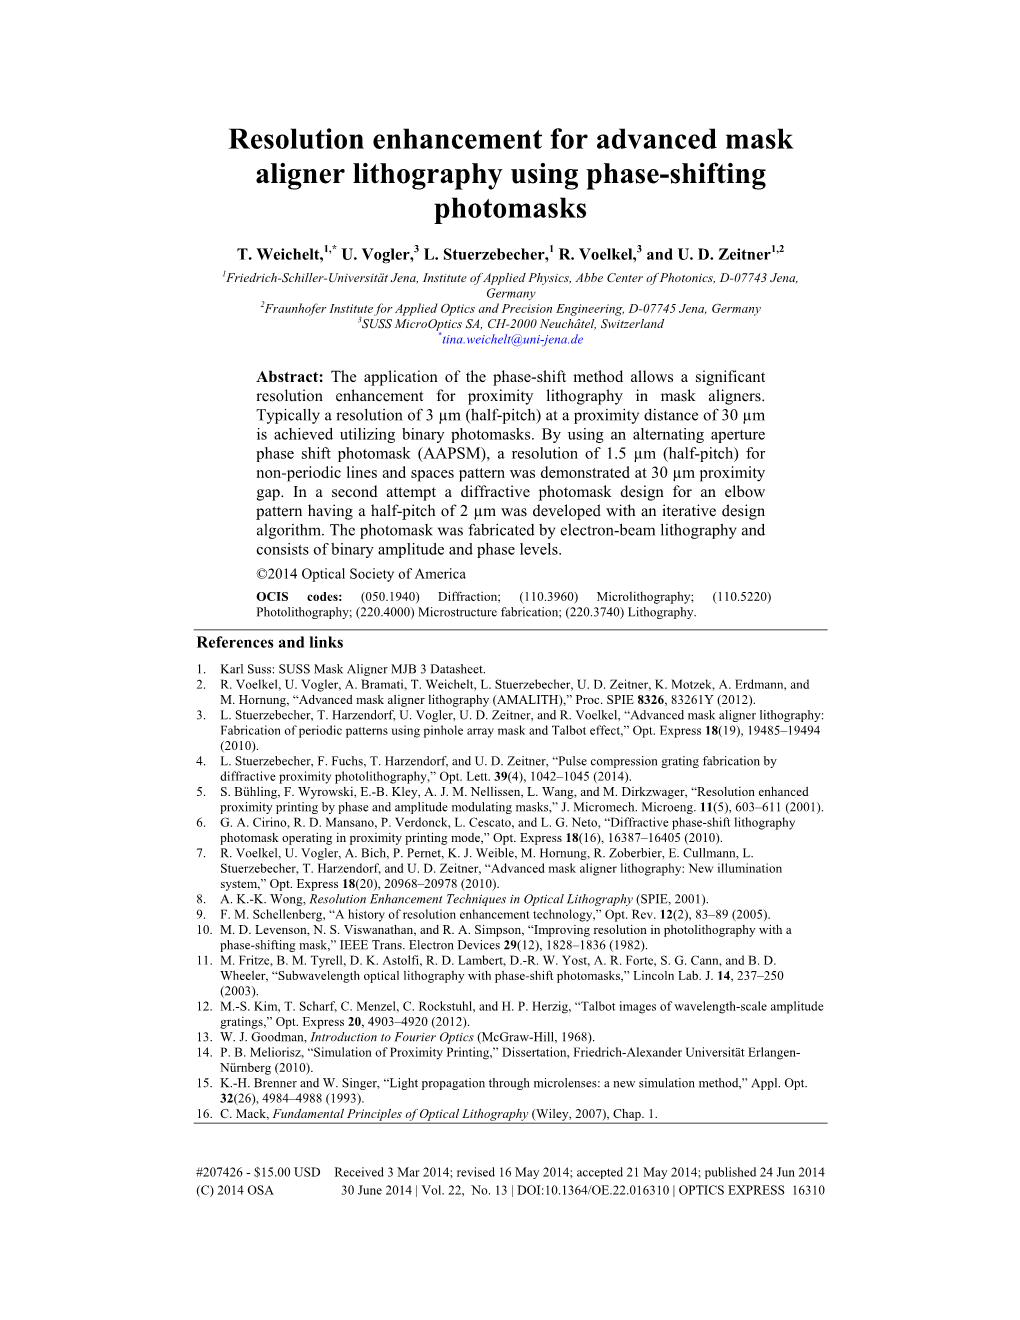 Resolution Enhancement for Advanced Mask Aligner Lithography Using Phase-Shifting Photomasks